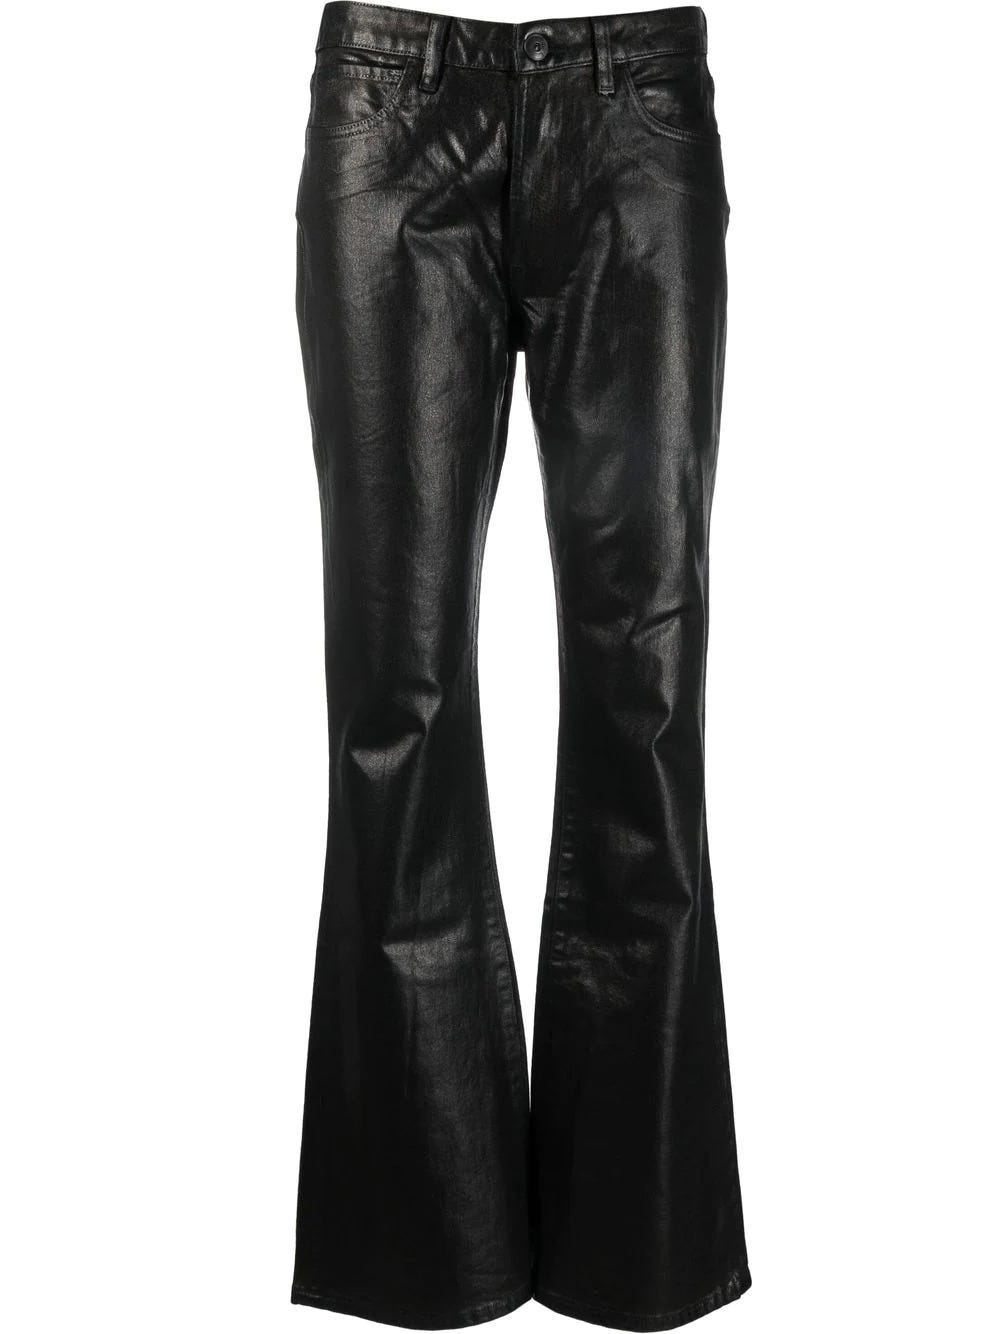 3X1 SATIN-FINISH BLACK FLARED JEANS WITH LOW WAIST